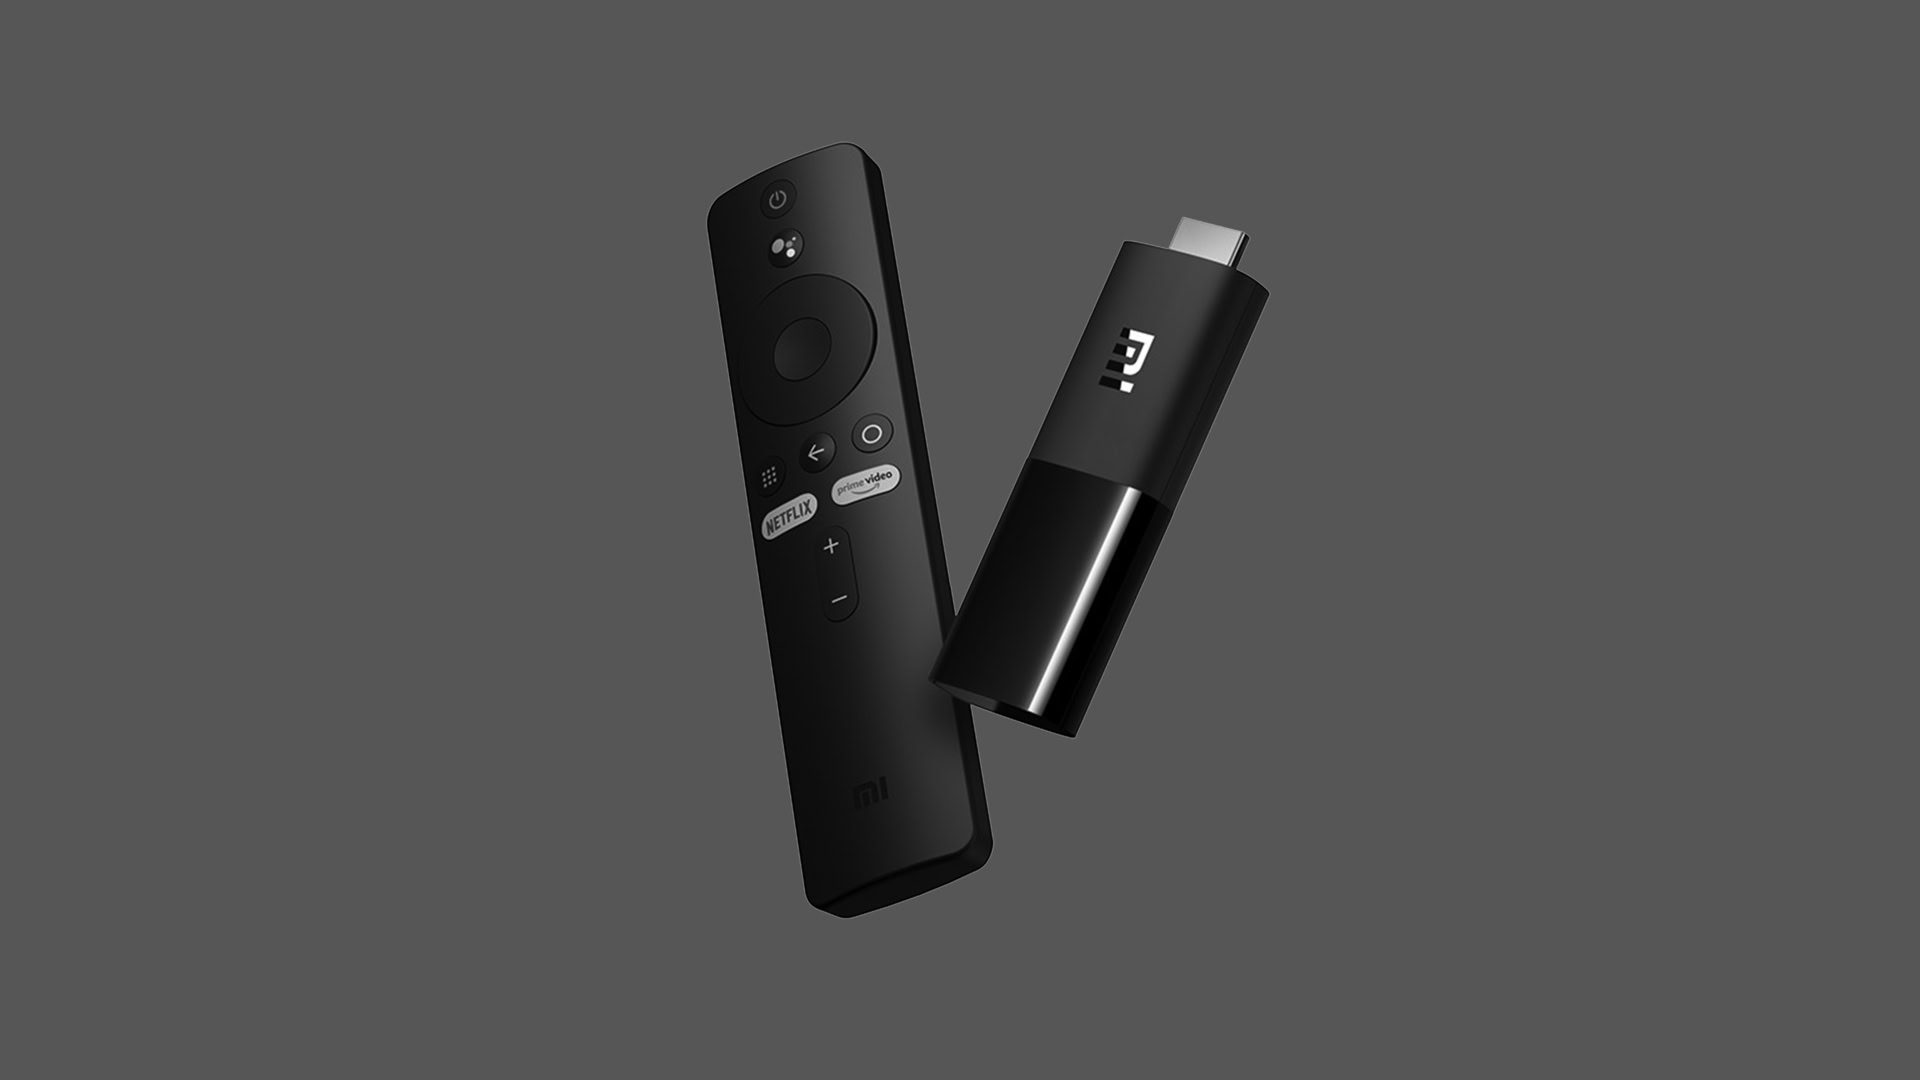 Xiaomi's new 'Mi TV Stick' may only include 4K on upgrade - 9to5Google